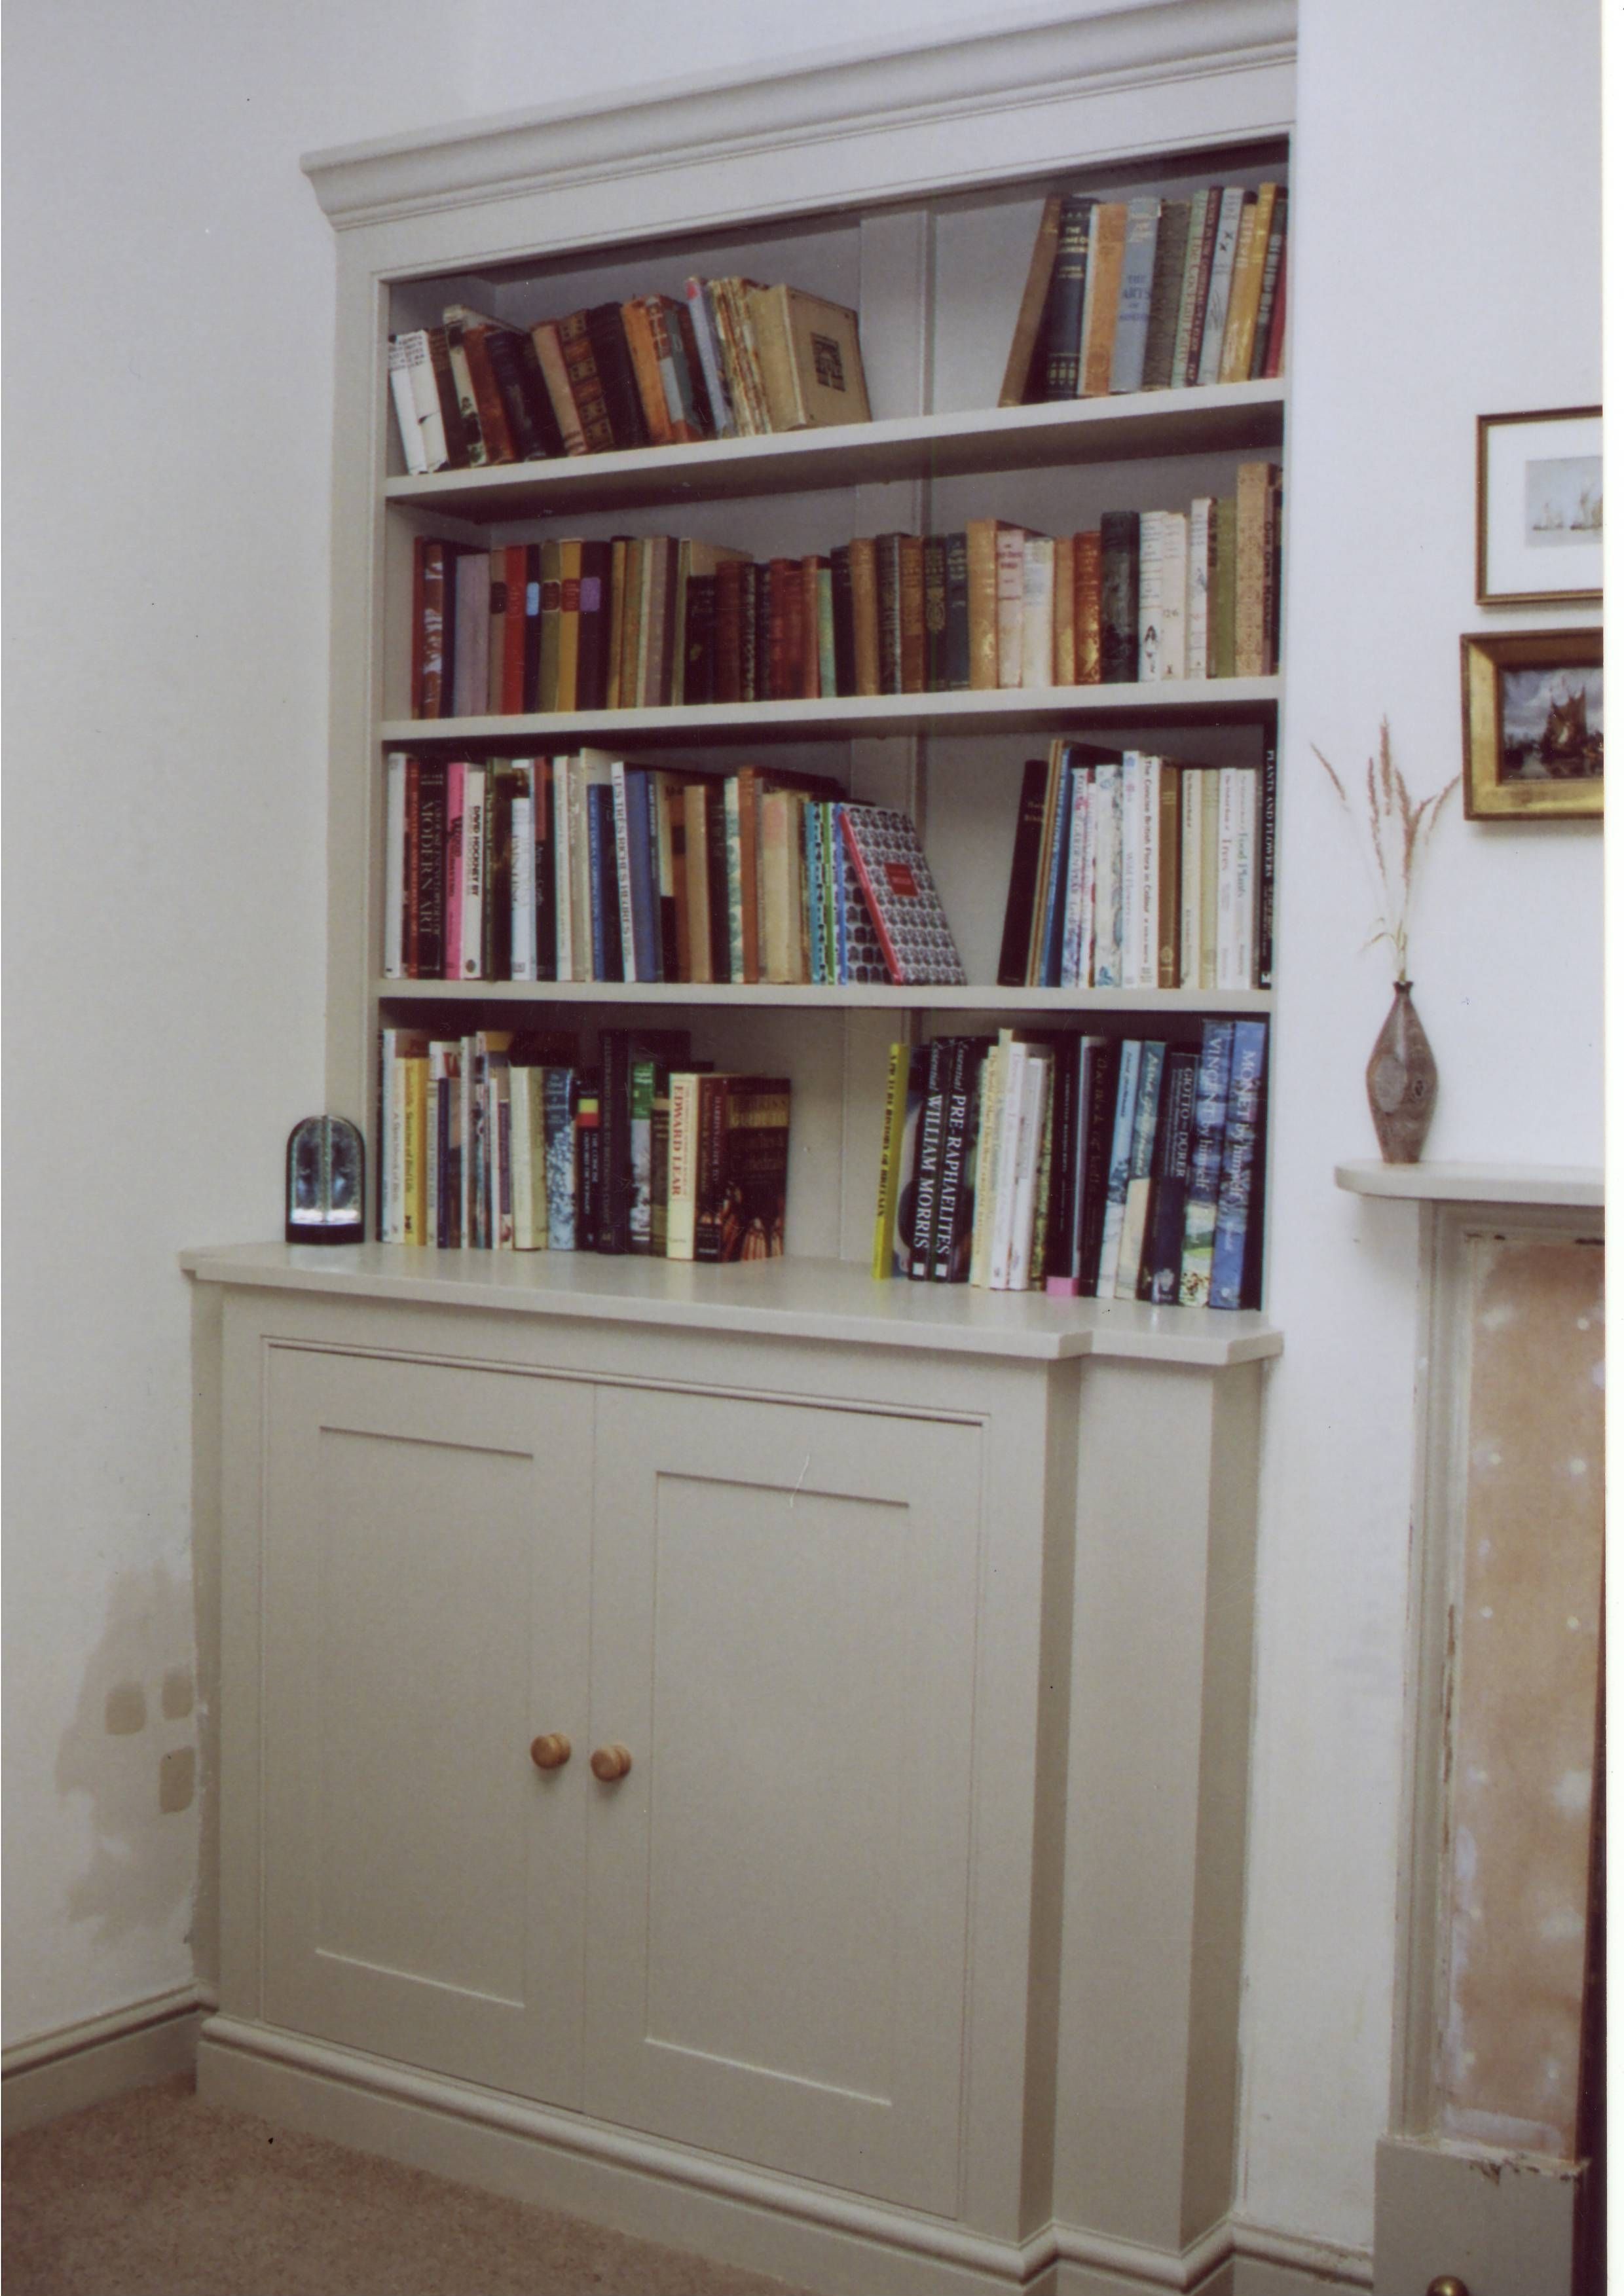 Handmade Built In Furniture Broughton Joinery Fitted Furniture Throughout Bespoke Bookshelves (View 6 of 14)